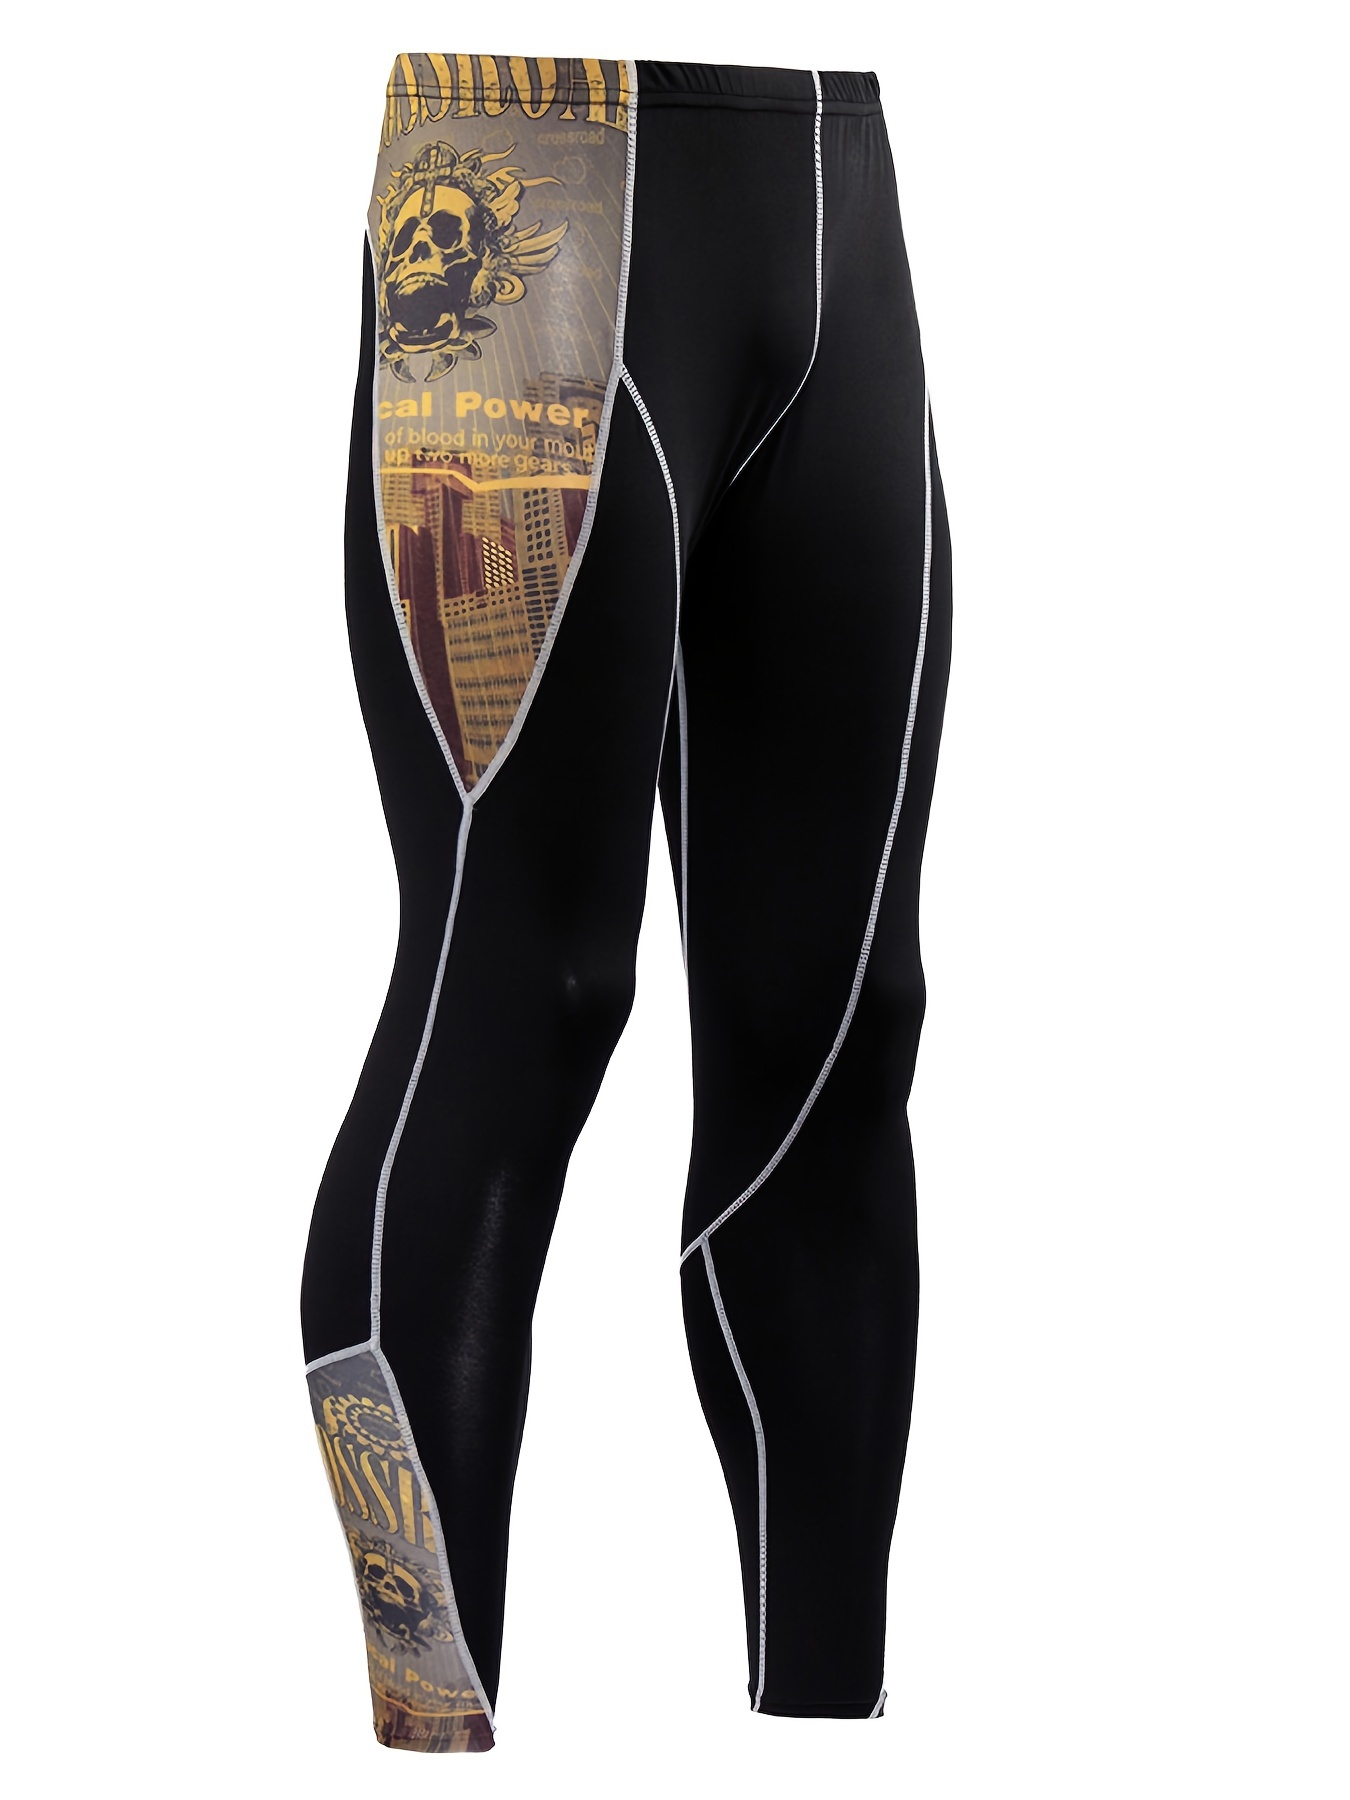 Mens Compression Pants Base Layer Under Layer Skin Fit Gym Running